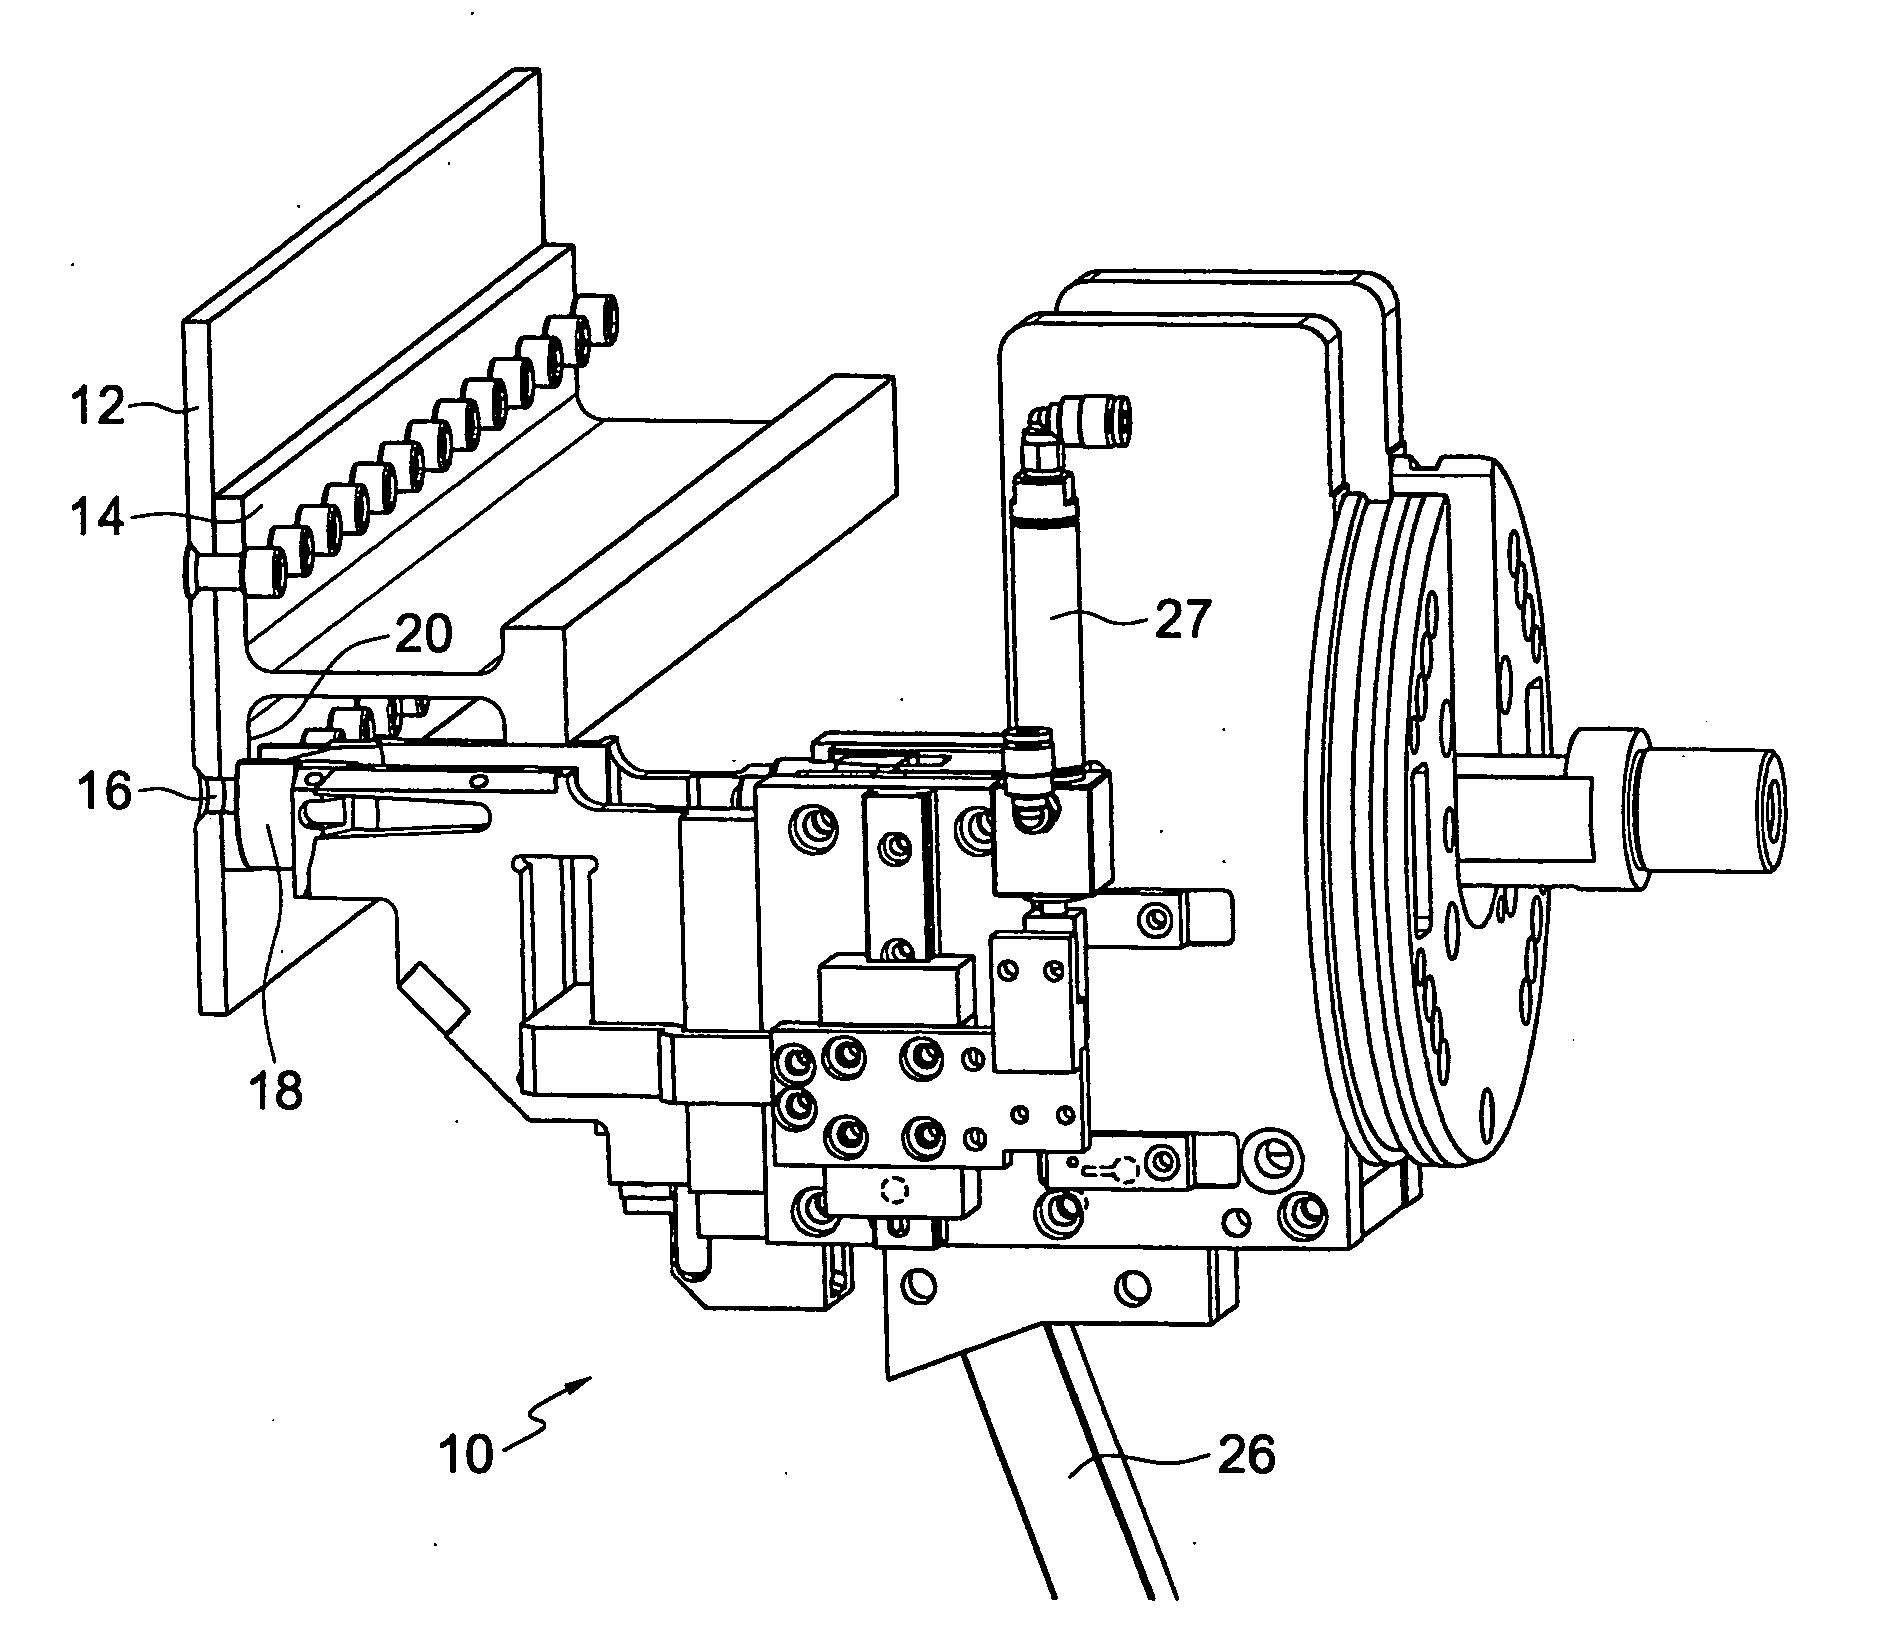 System for loading collars onto bolts in large-scale manufacturing operations